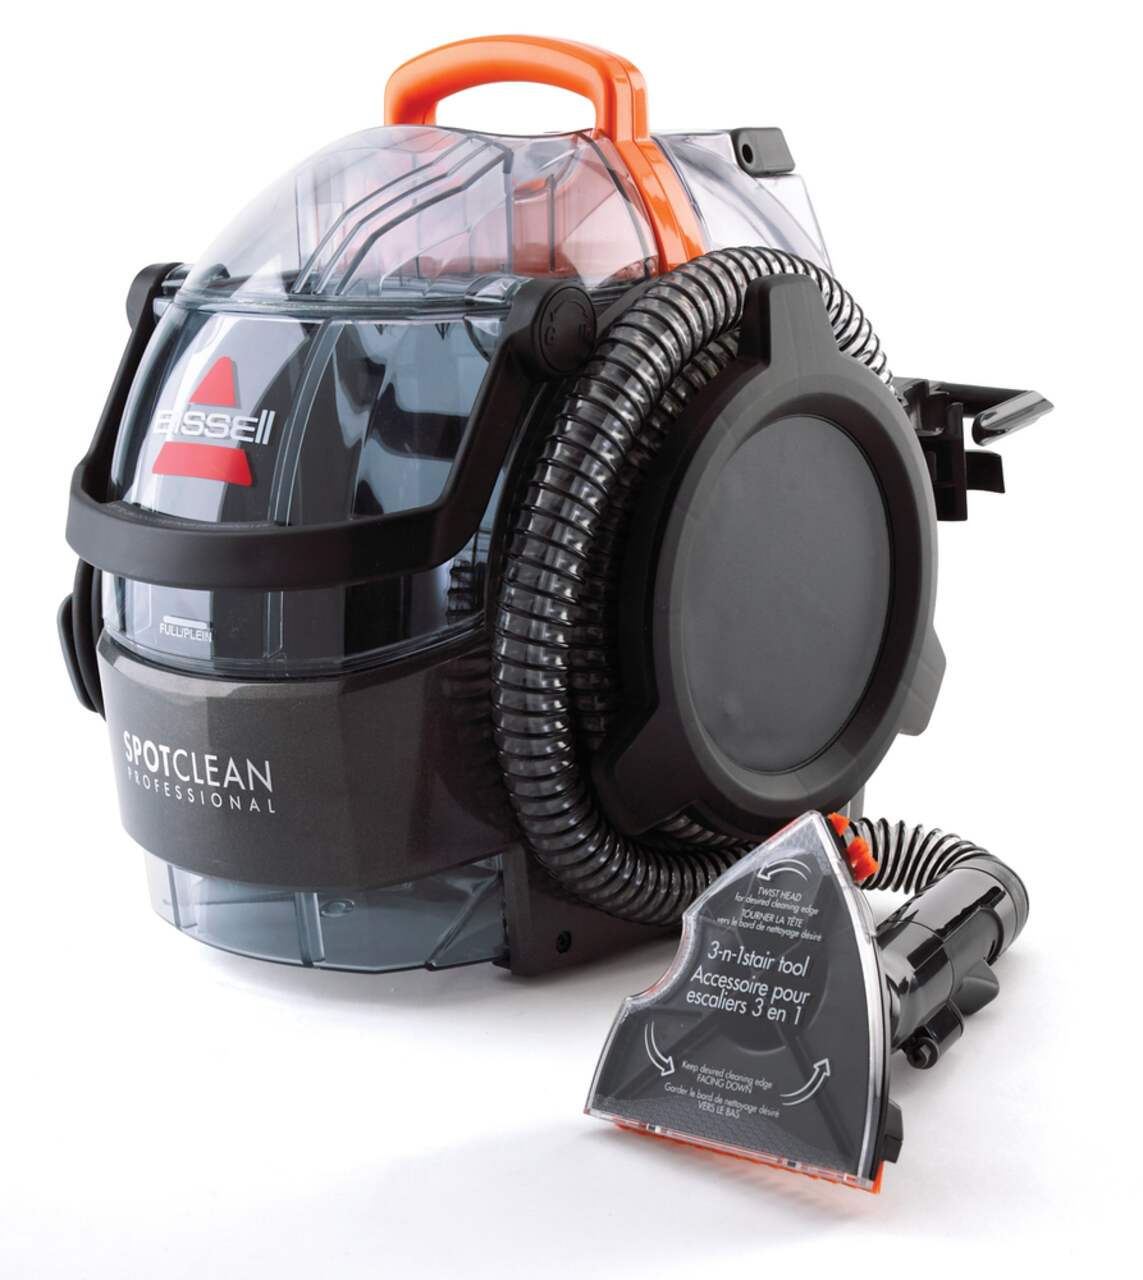 https://media-www.canadiantire.ca/product/living/cleaning/vacuums-and-floorcare/0436959/bissell-professional-portable-deep-cleaner-d79b3f1a-be1a-436d-9b92-e7f89329a726.png?imdensity=1&imwidth=640&impolicy=mZoom